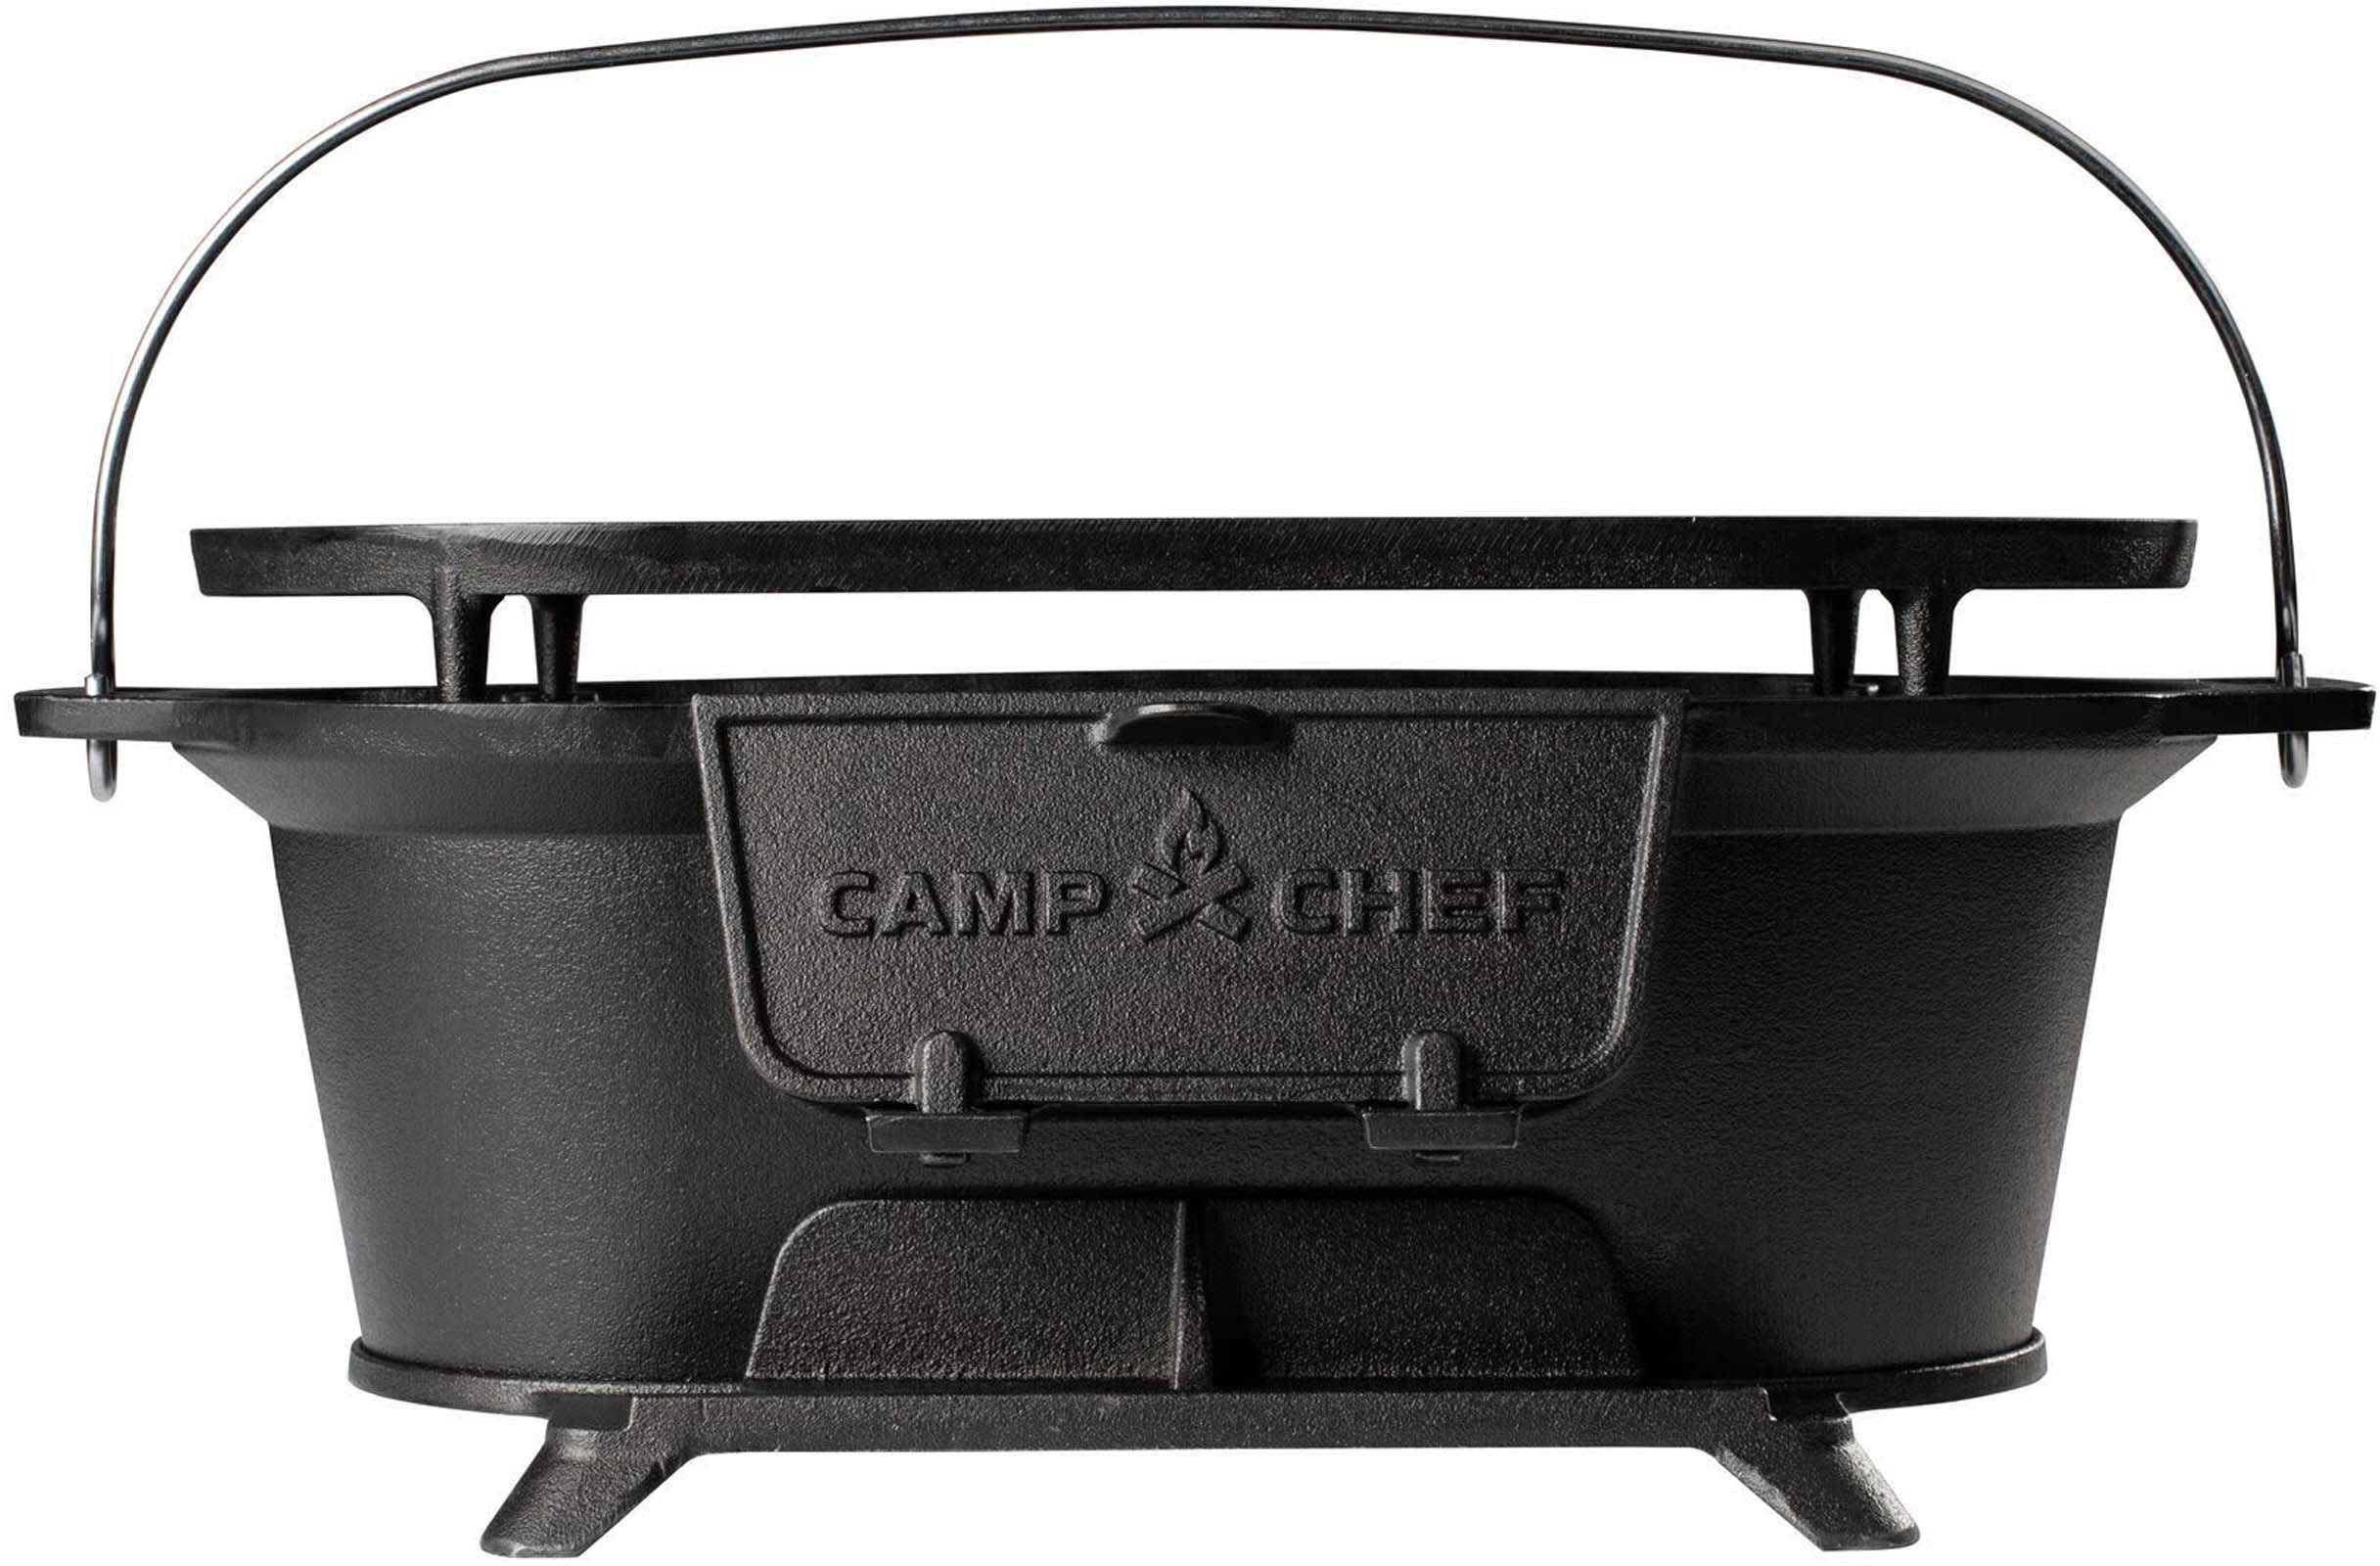 https://op1.0ps.us/original/opplanet-camp-chef-cast-iron-charcoal-grill-black-cigr19-main